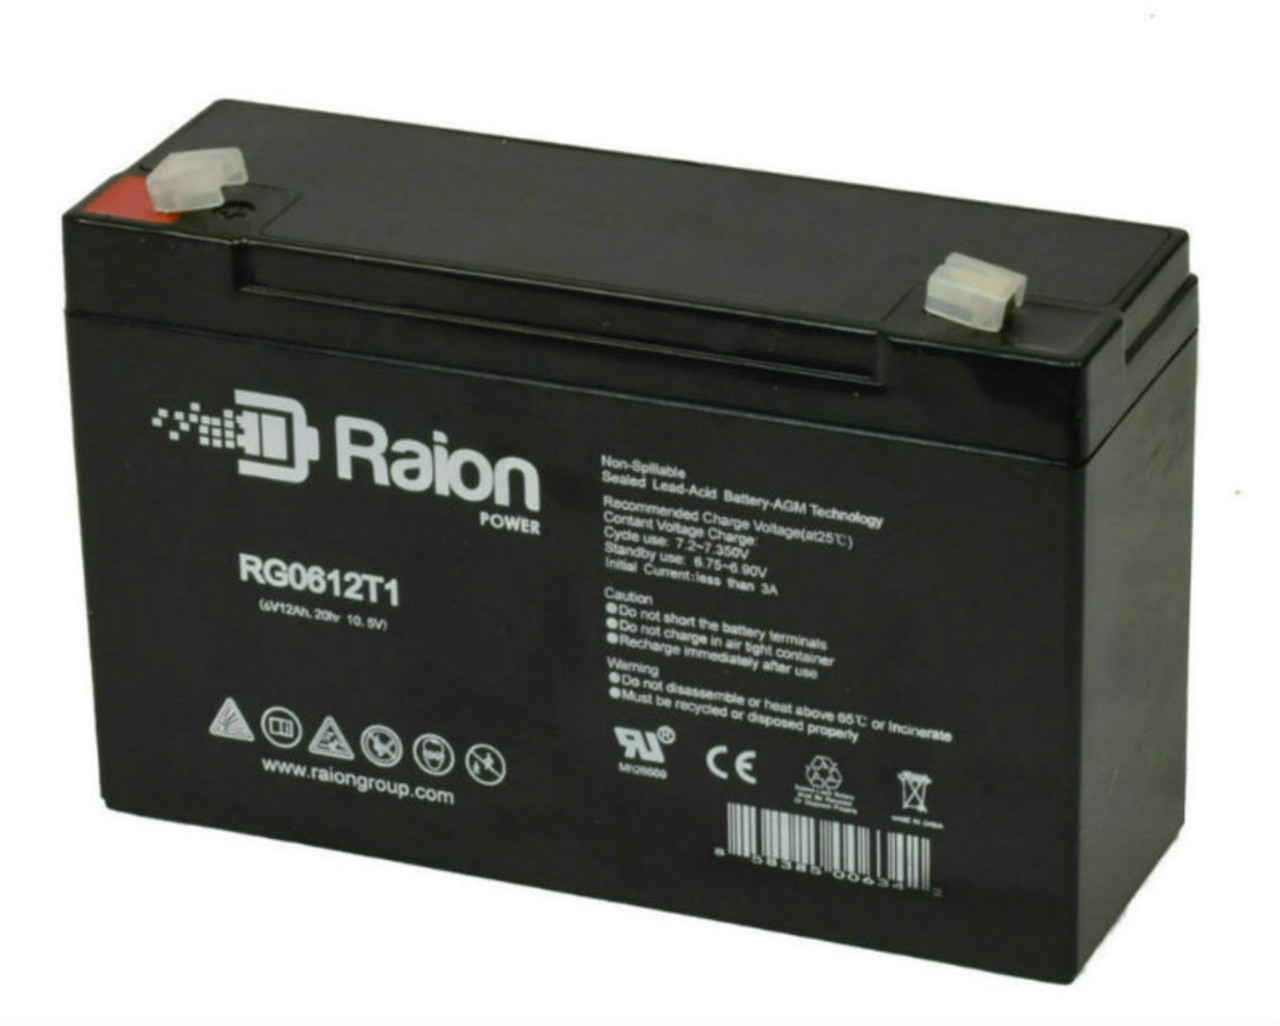 Raion Power RG06120T1 Replacement Emergency Light Battery for Sure-Lites 26000304